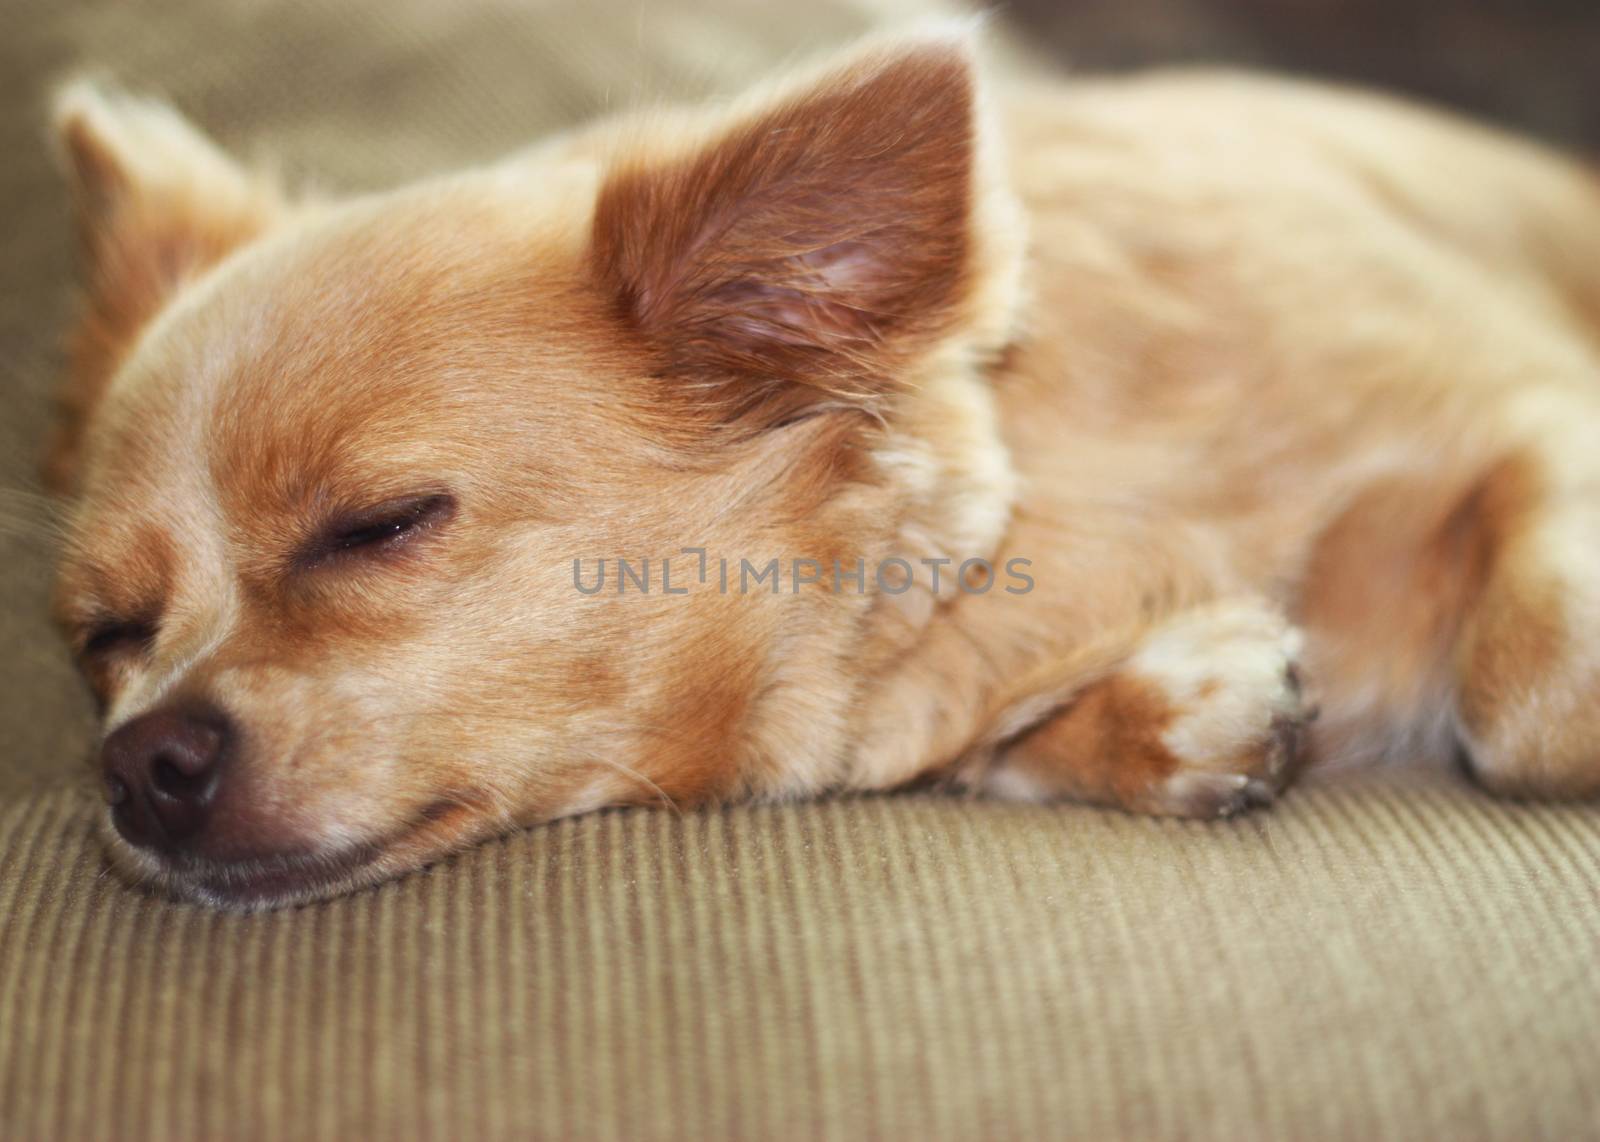 Cute chihuahua puppy sleeping on the couch.